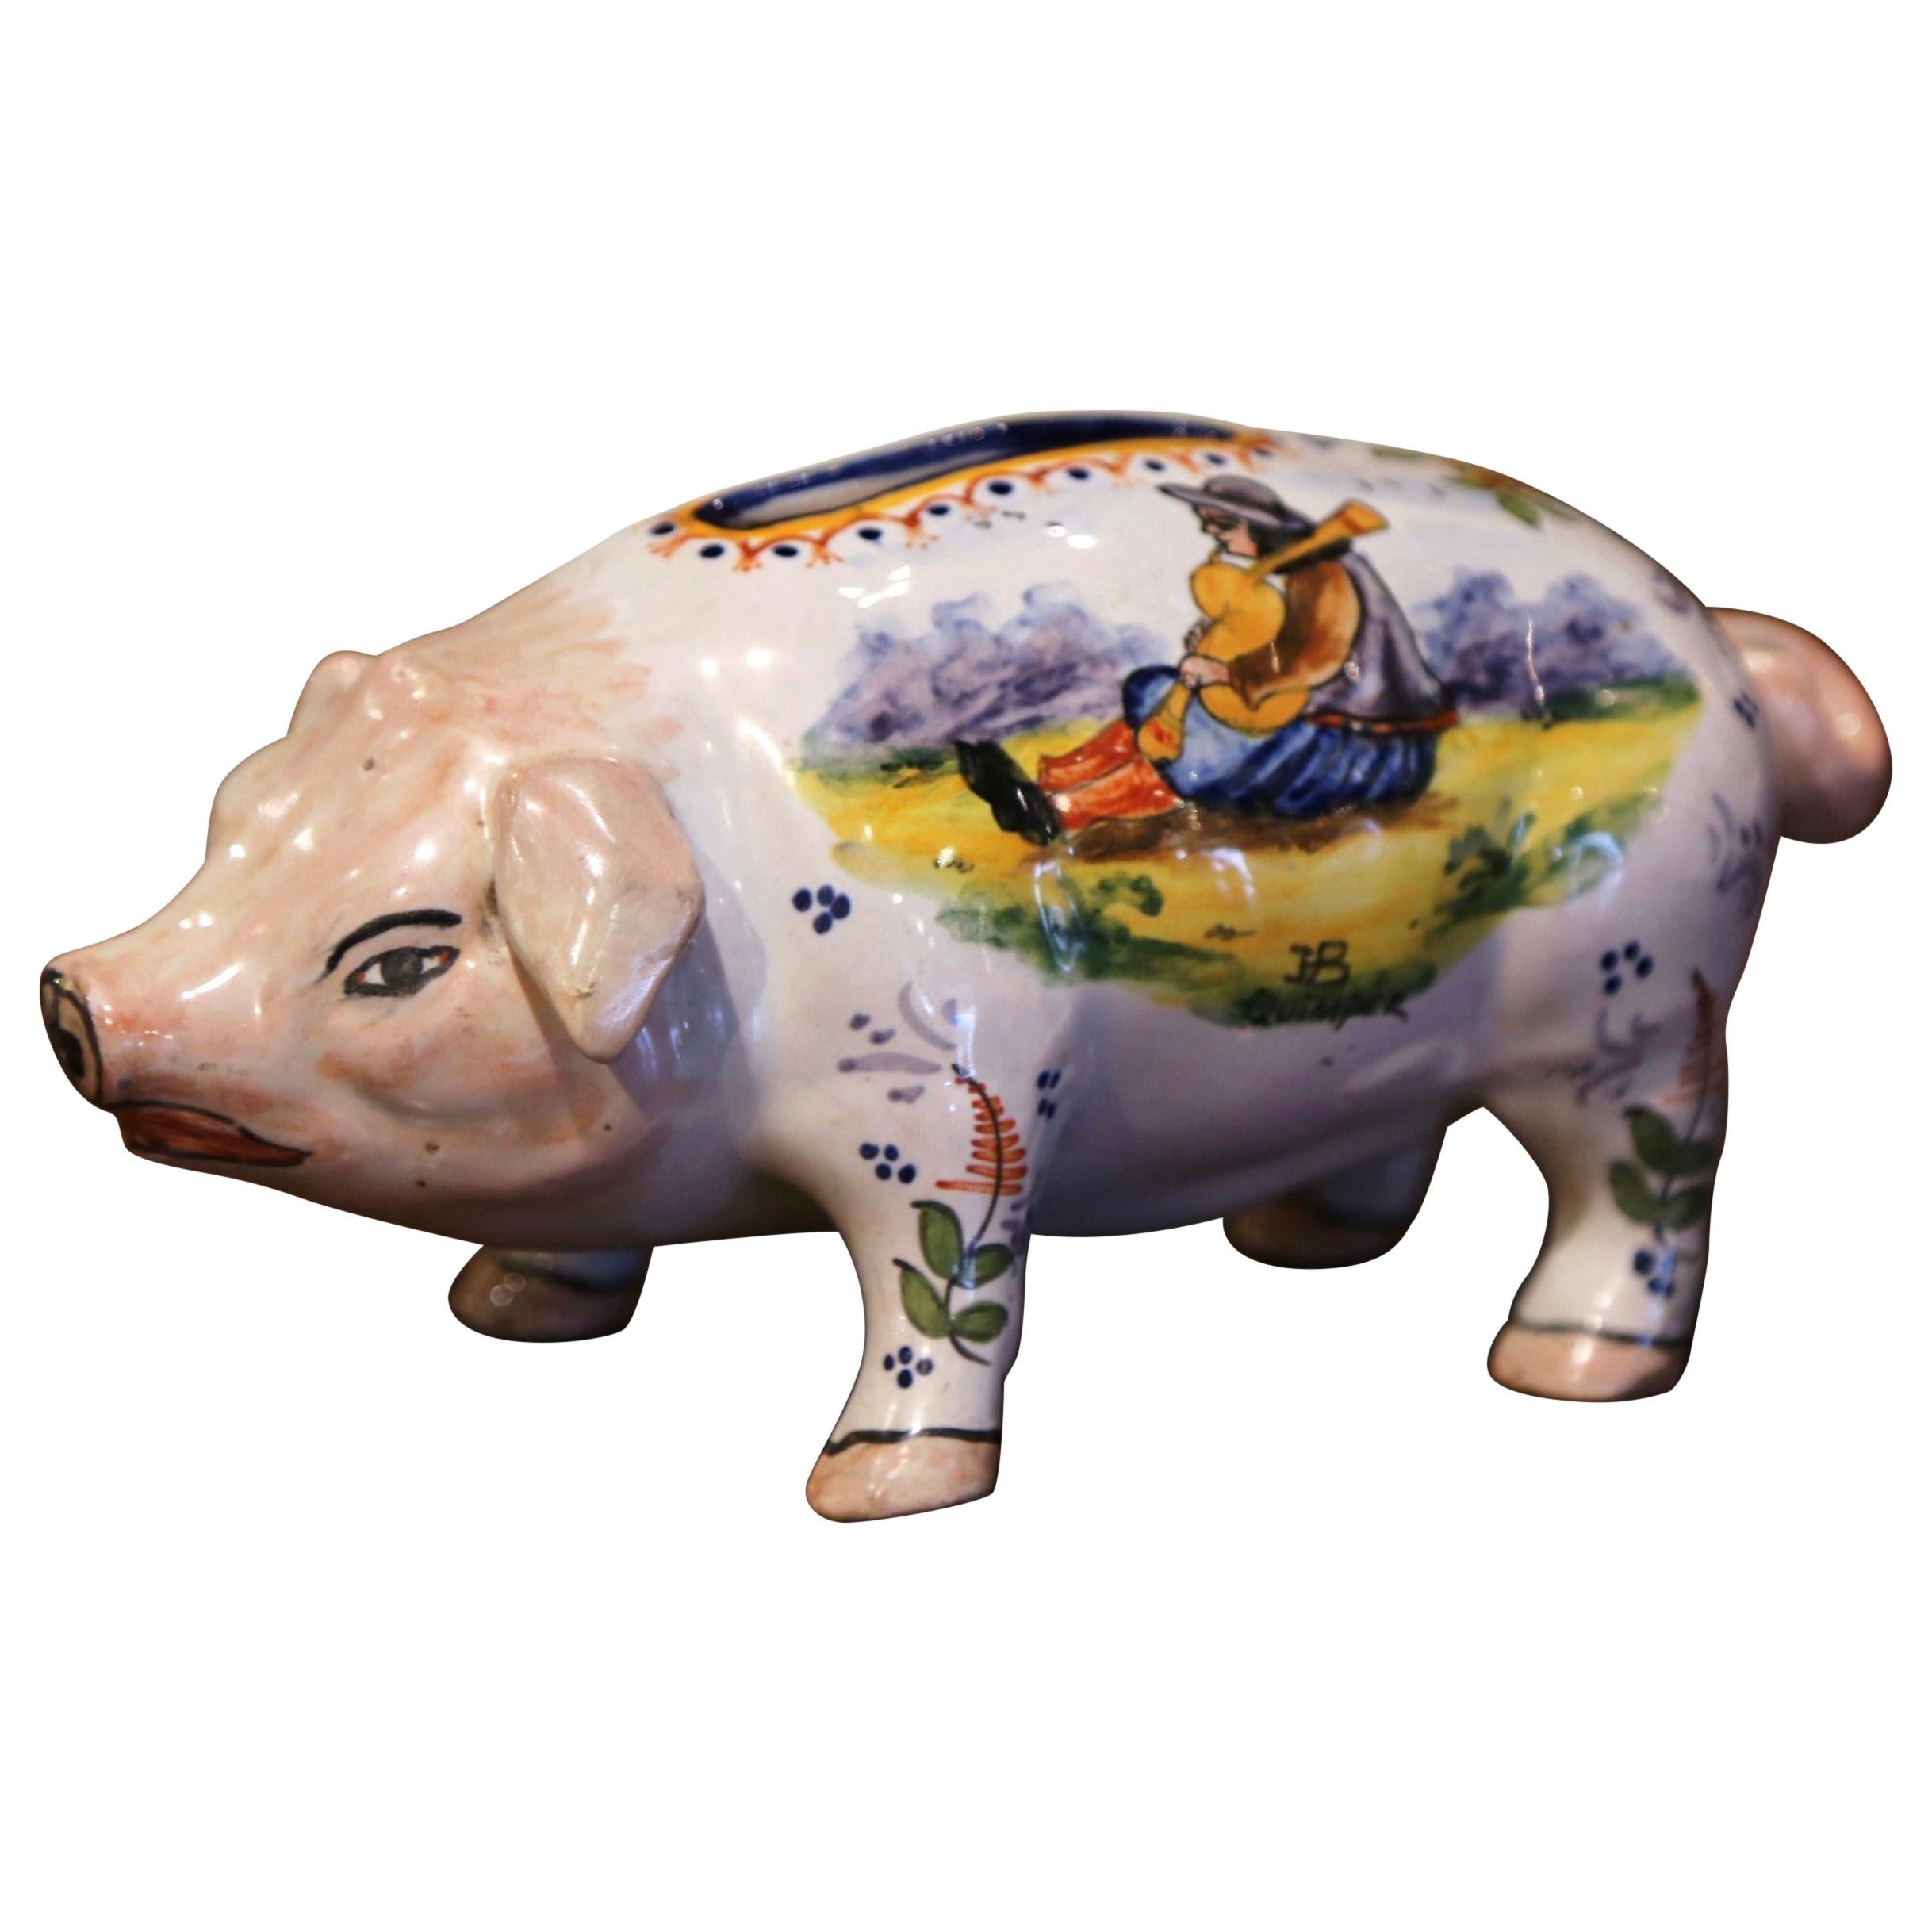 Complete your faience collection with this colorful antique piggy bank from Brittany. Crafted in Quimper, France, circa 1890, the ceramic piece depicts a standing and sniffing pig sculpture with open slot on the top. The coin keeper is decorated